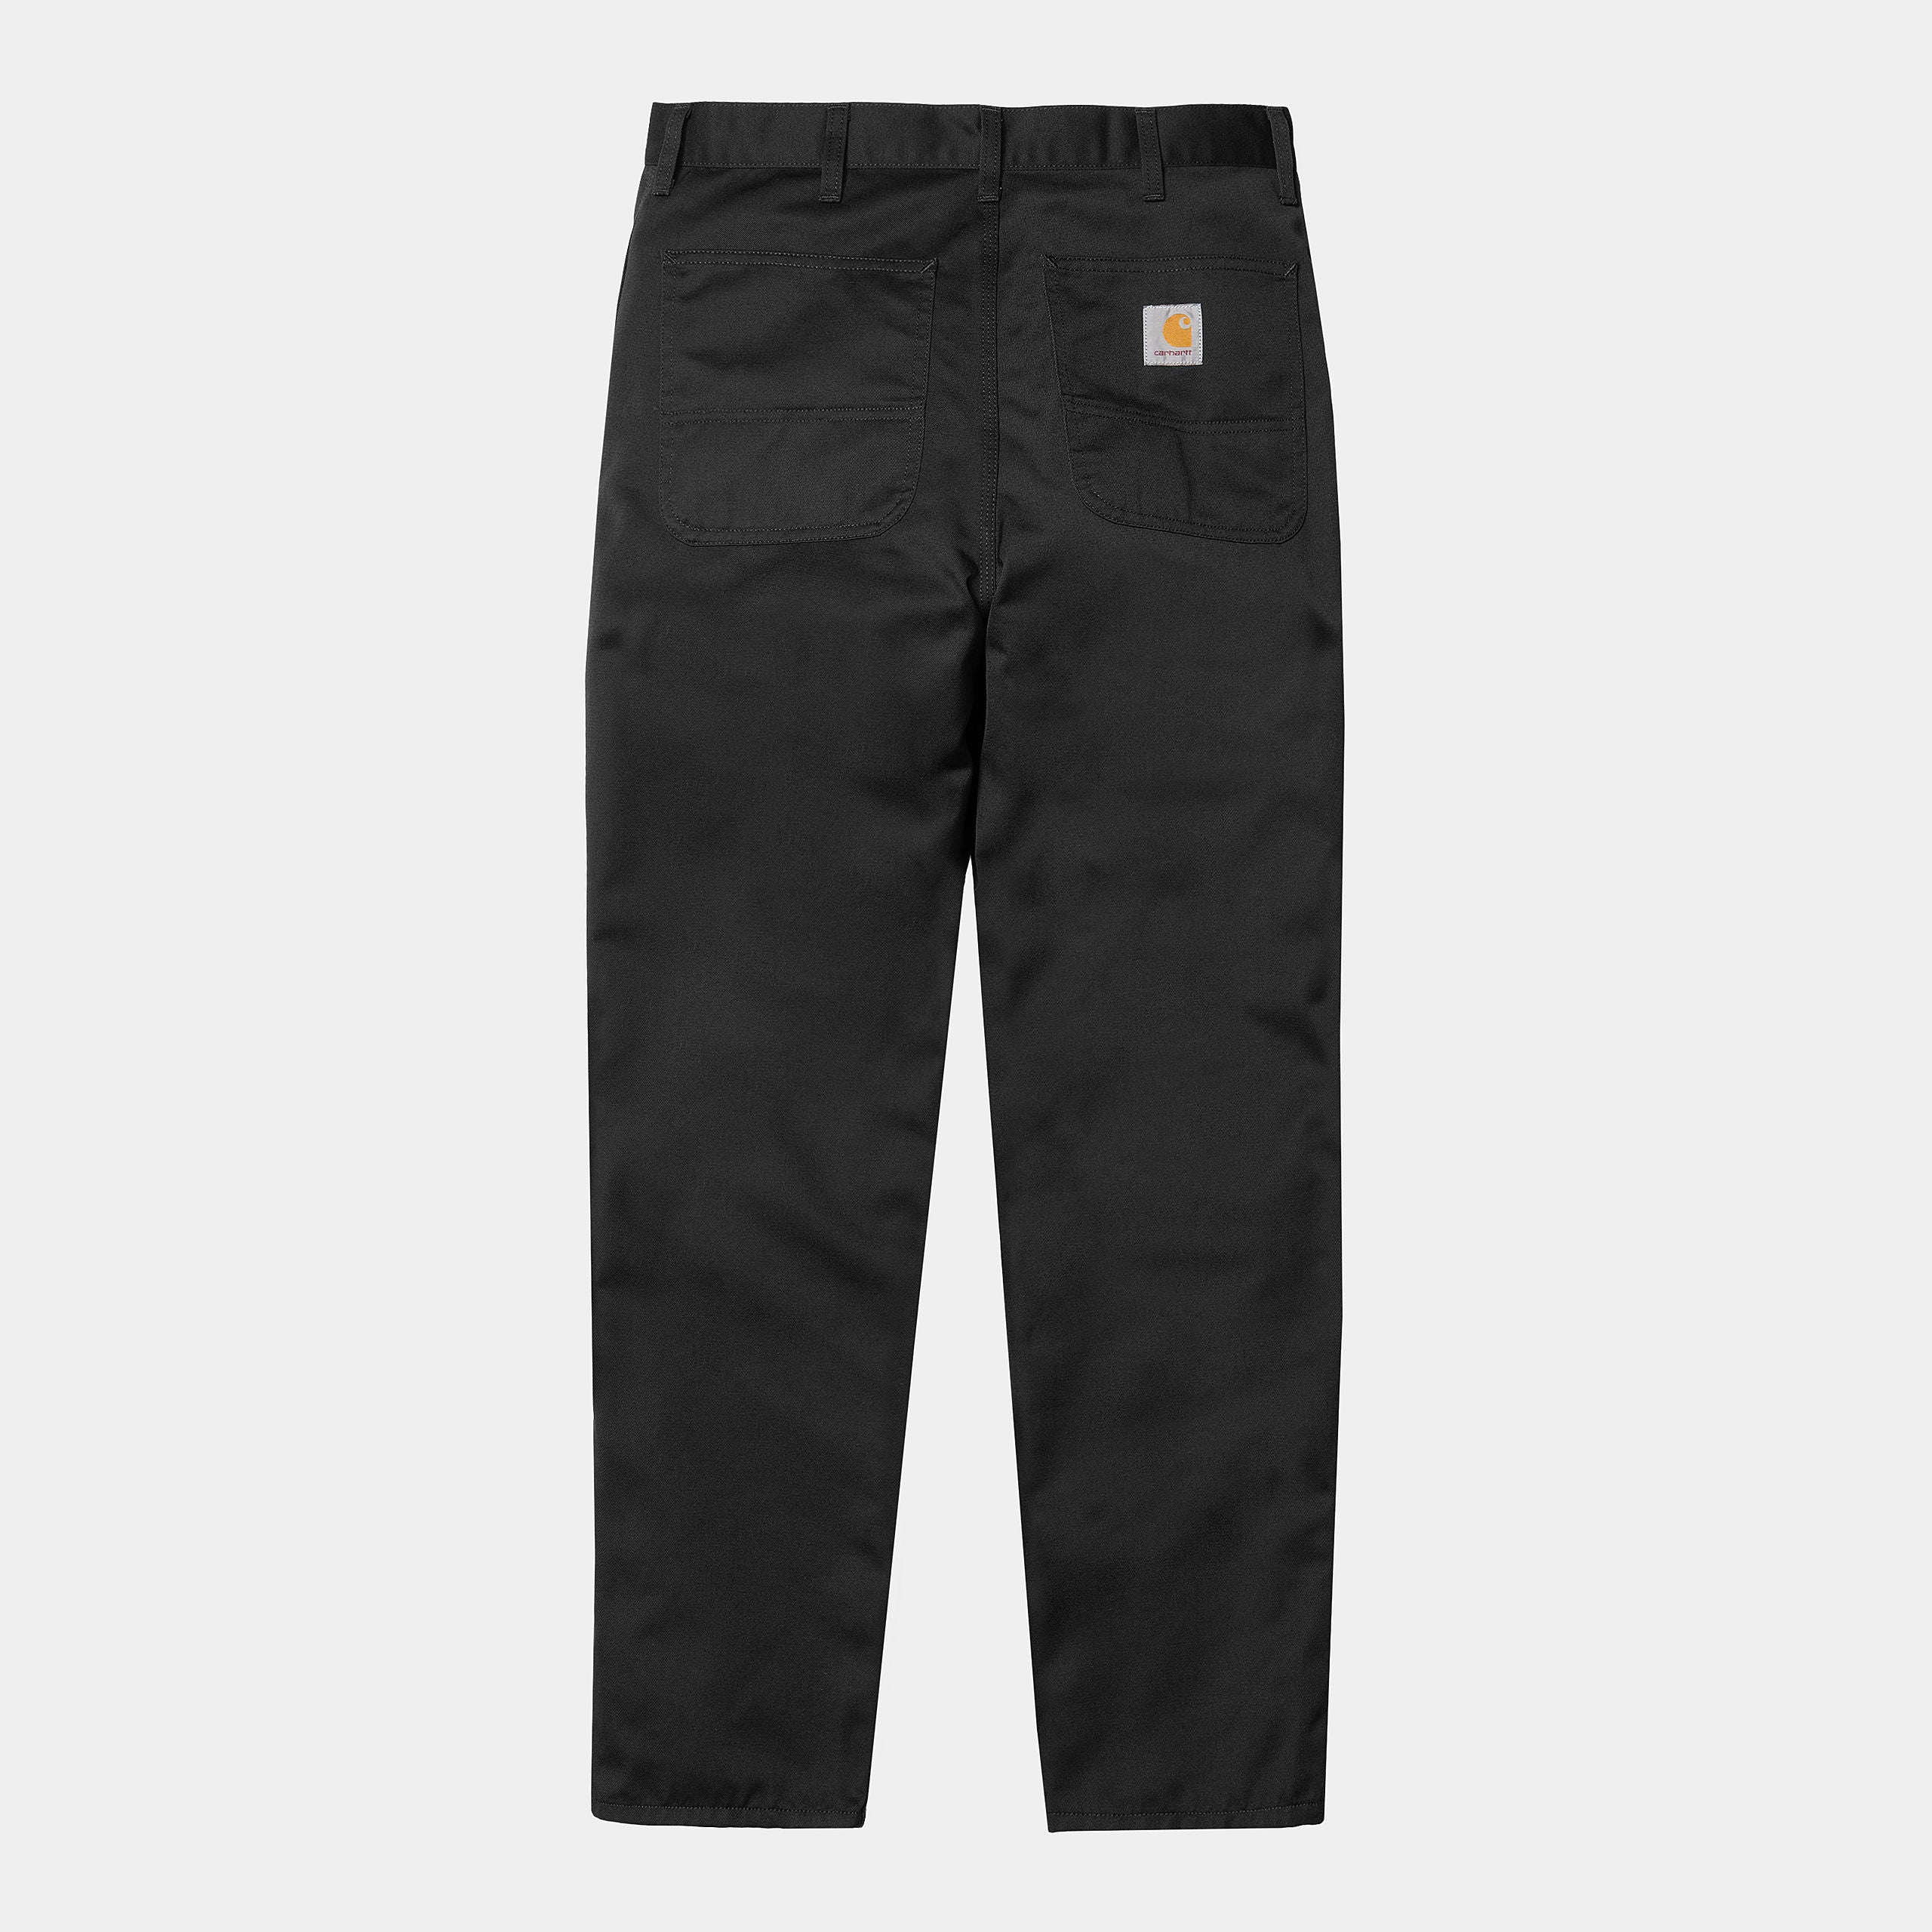 Carhartt Wip Simple Pant Polyester/cotton Denison Twill, 8.8 Oz Black Rinsed Men